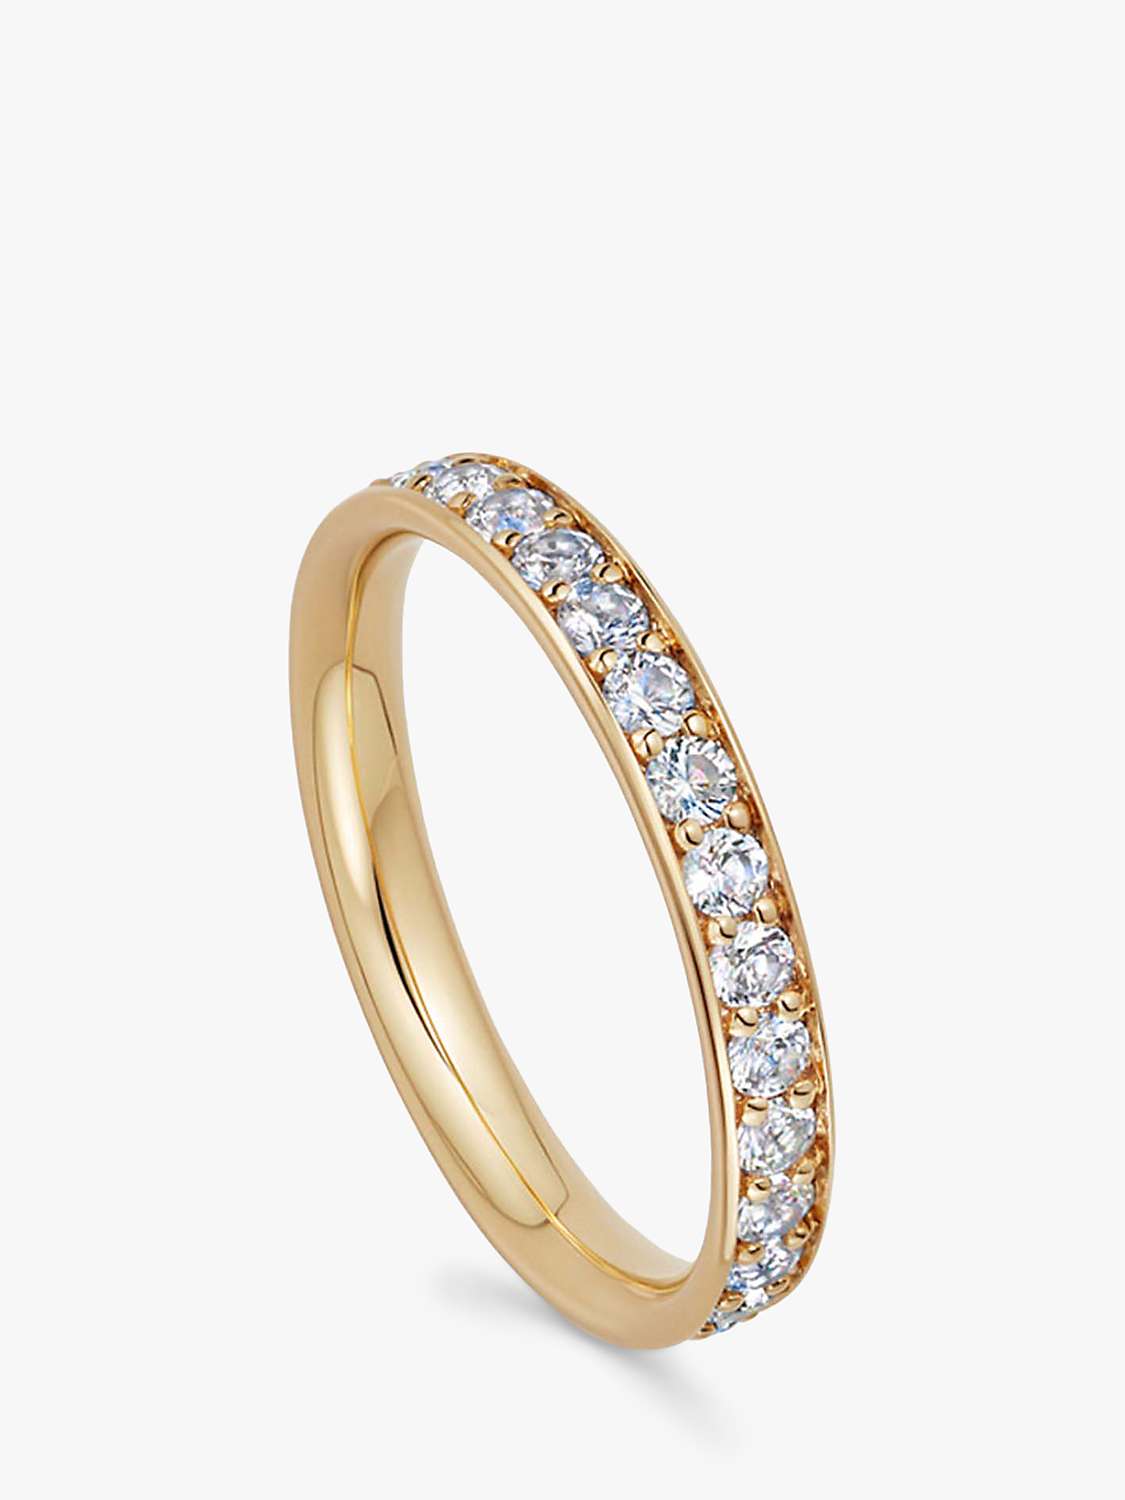 Buy Astley Clarke Sapphire Eternity Ring, Gold Online at johnlewis.com